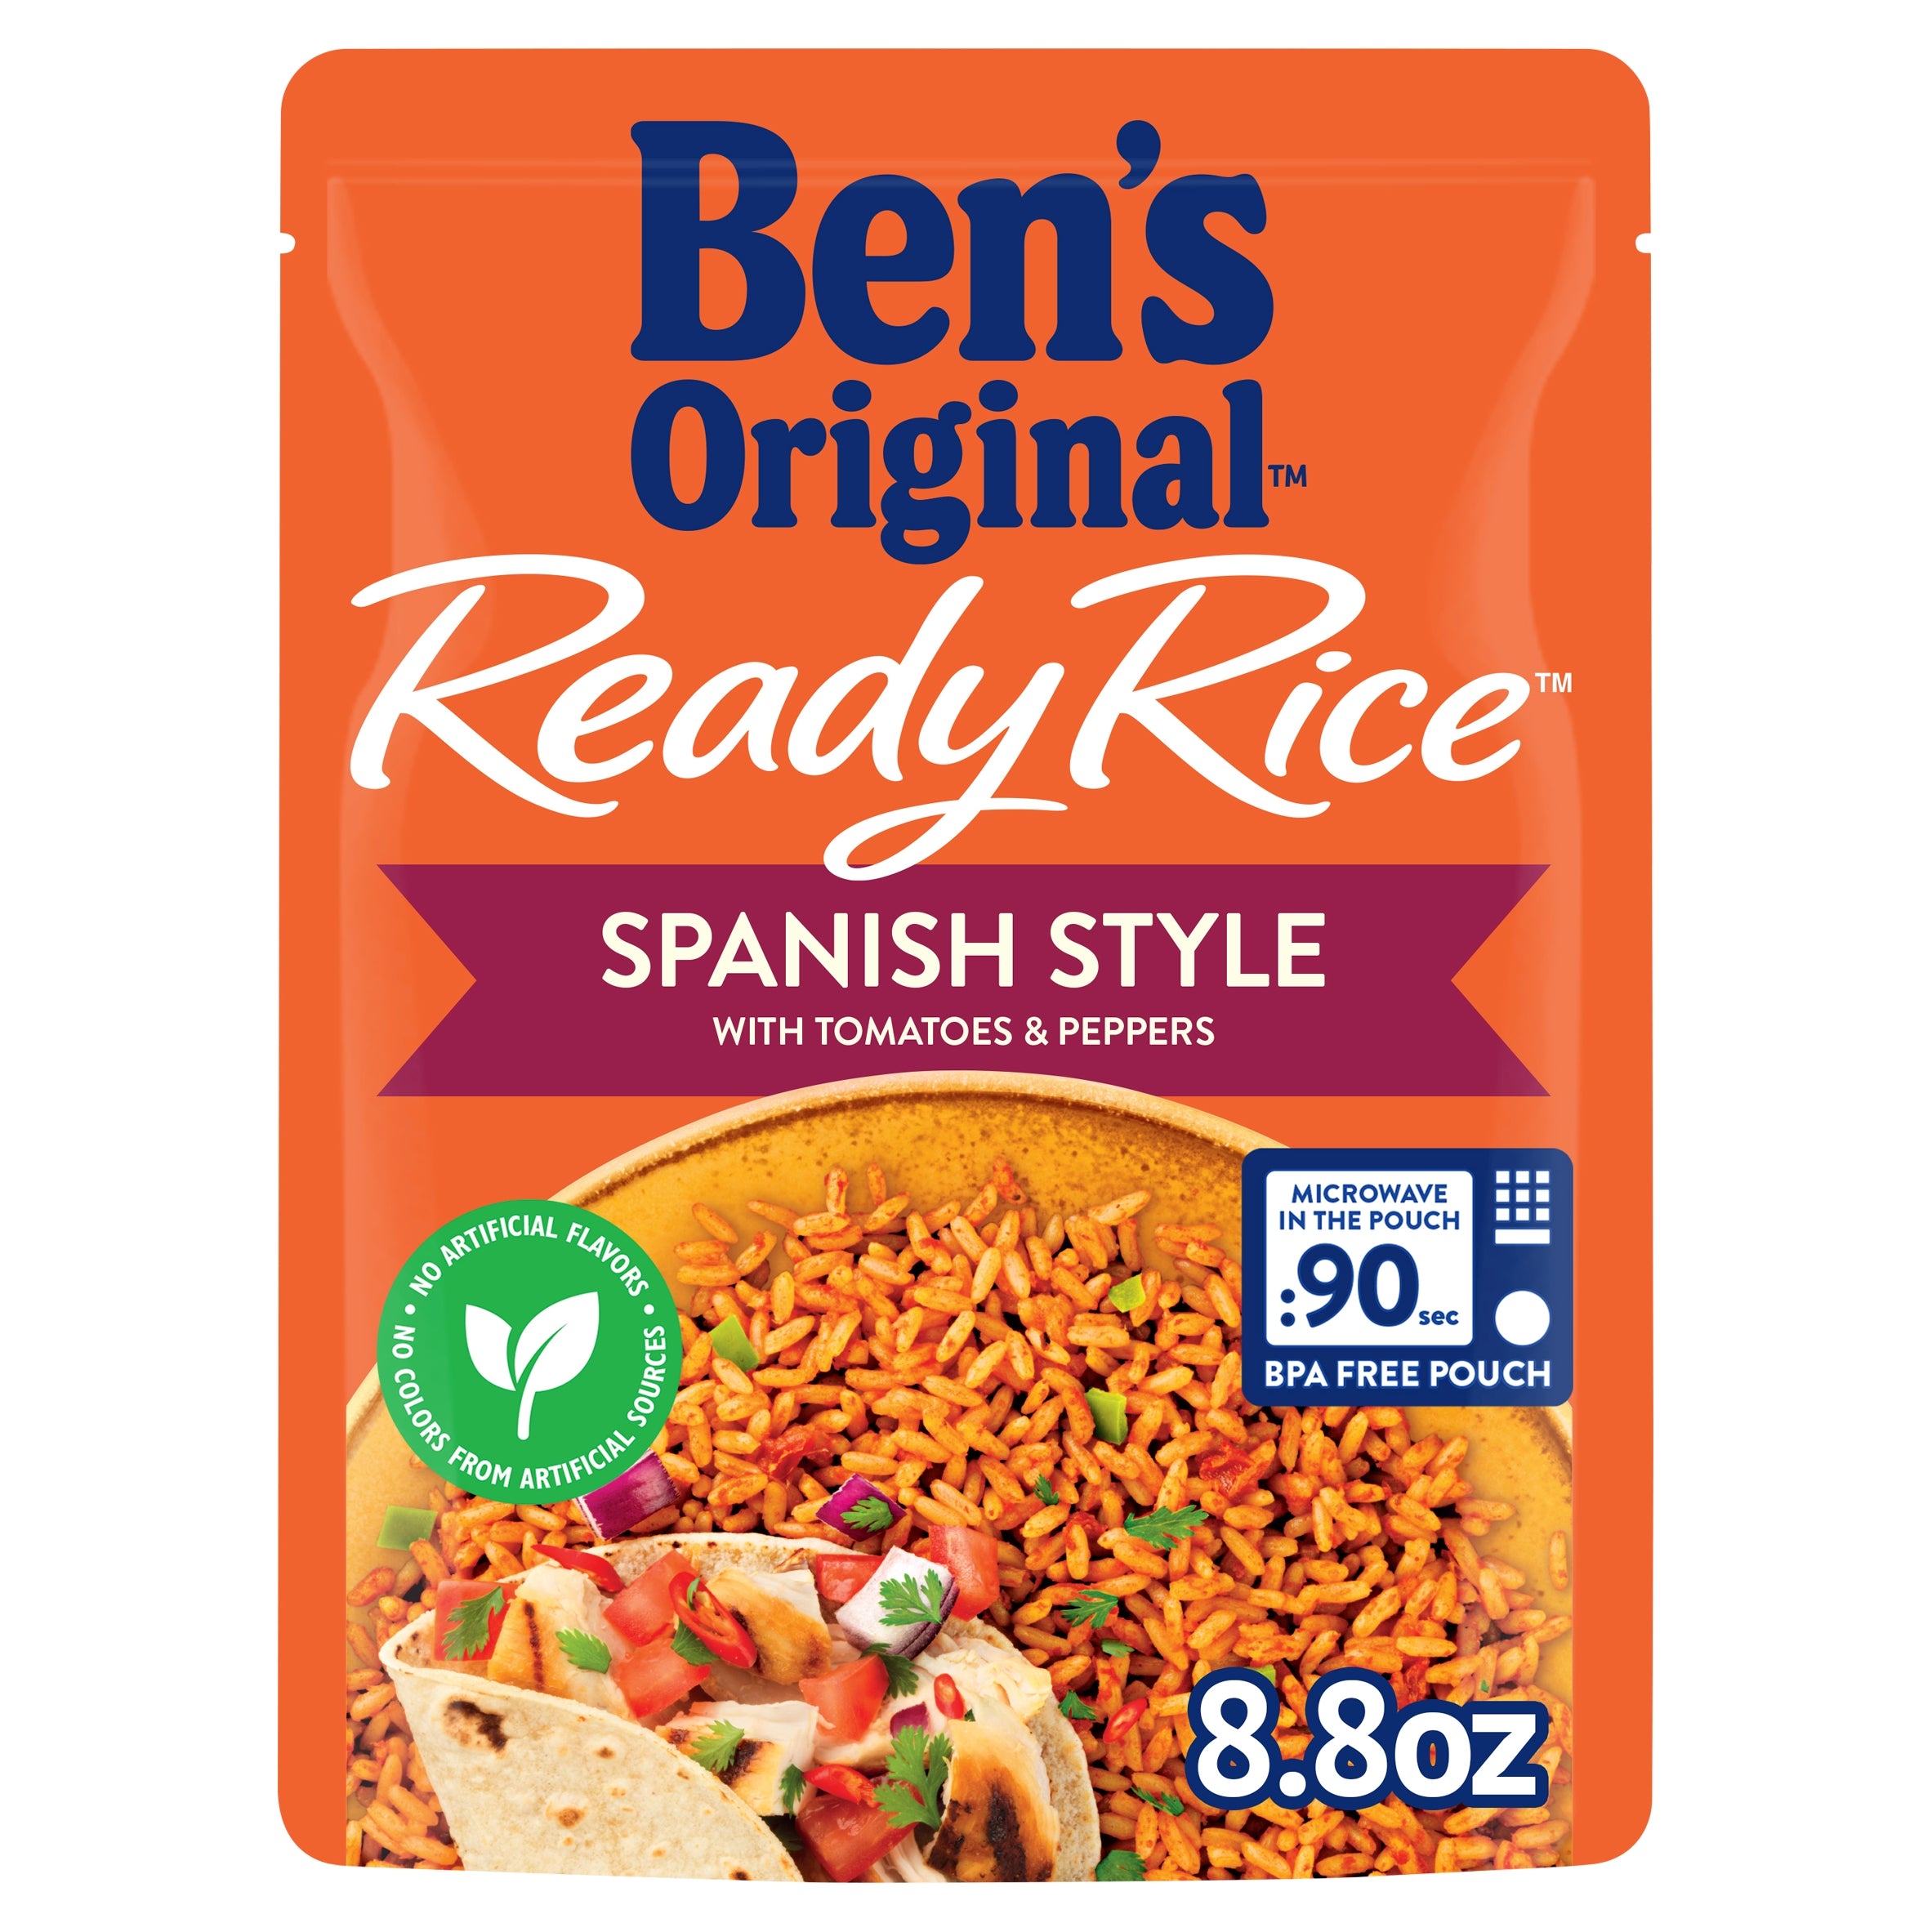 BEN'S ORIGINAL Ready Rice Spanish Style Flavored Rice, Easy Dinner Side, 8.8 OZ Pouch (6 pack)